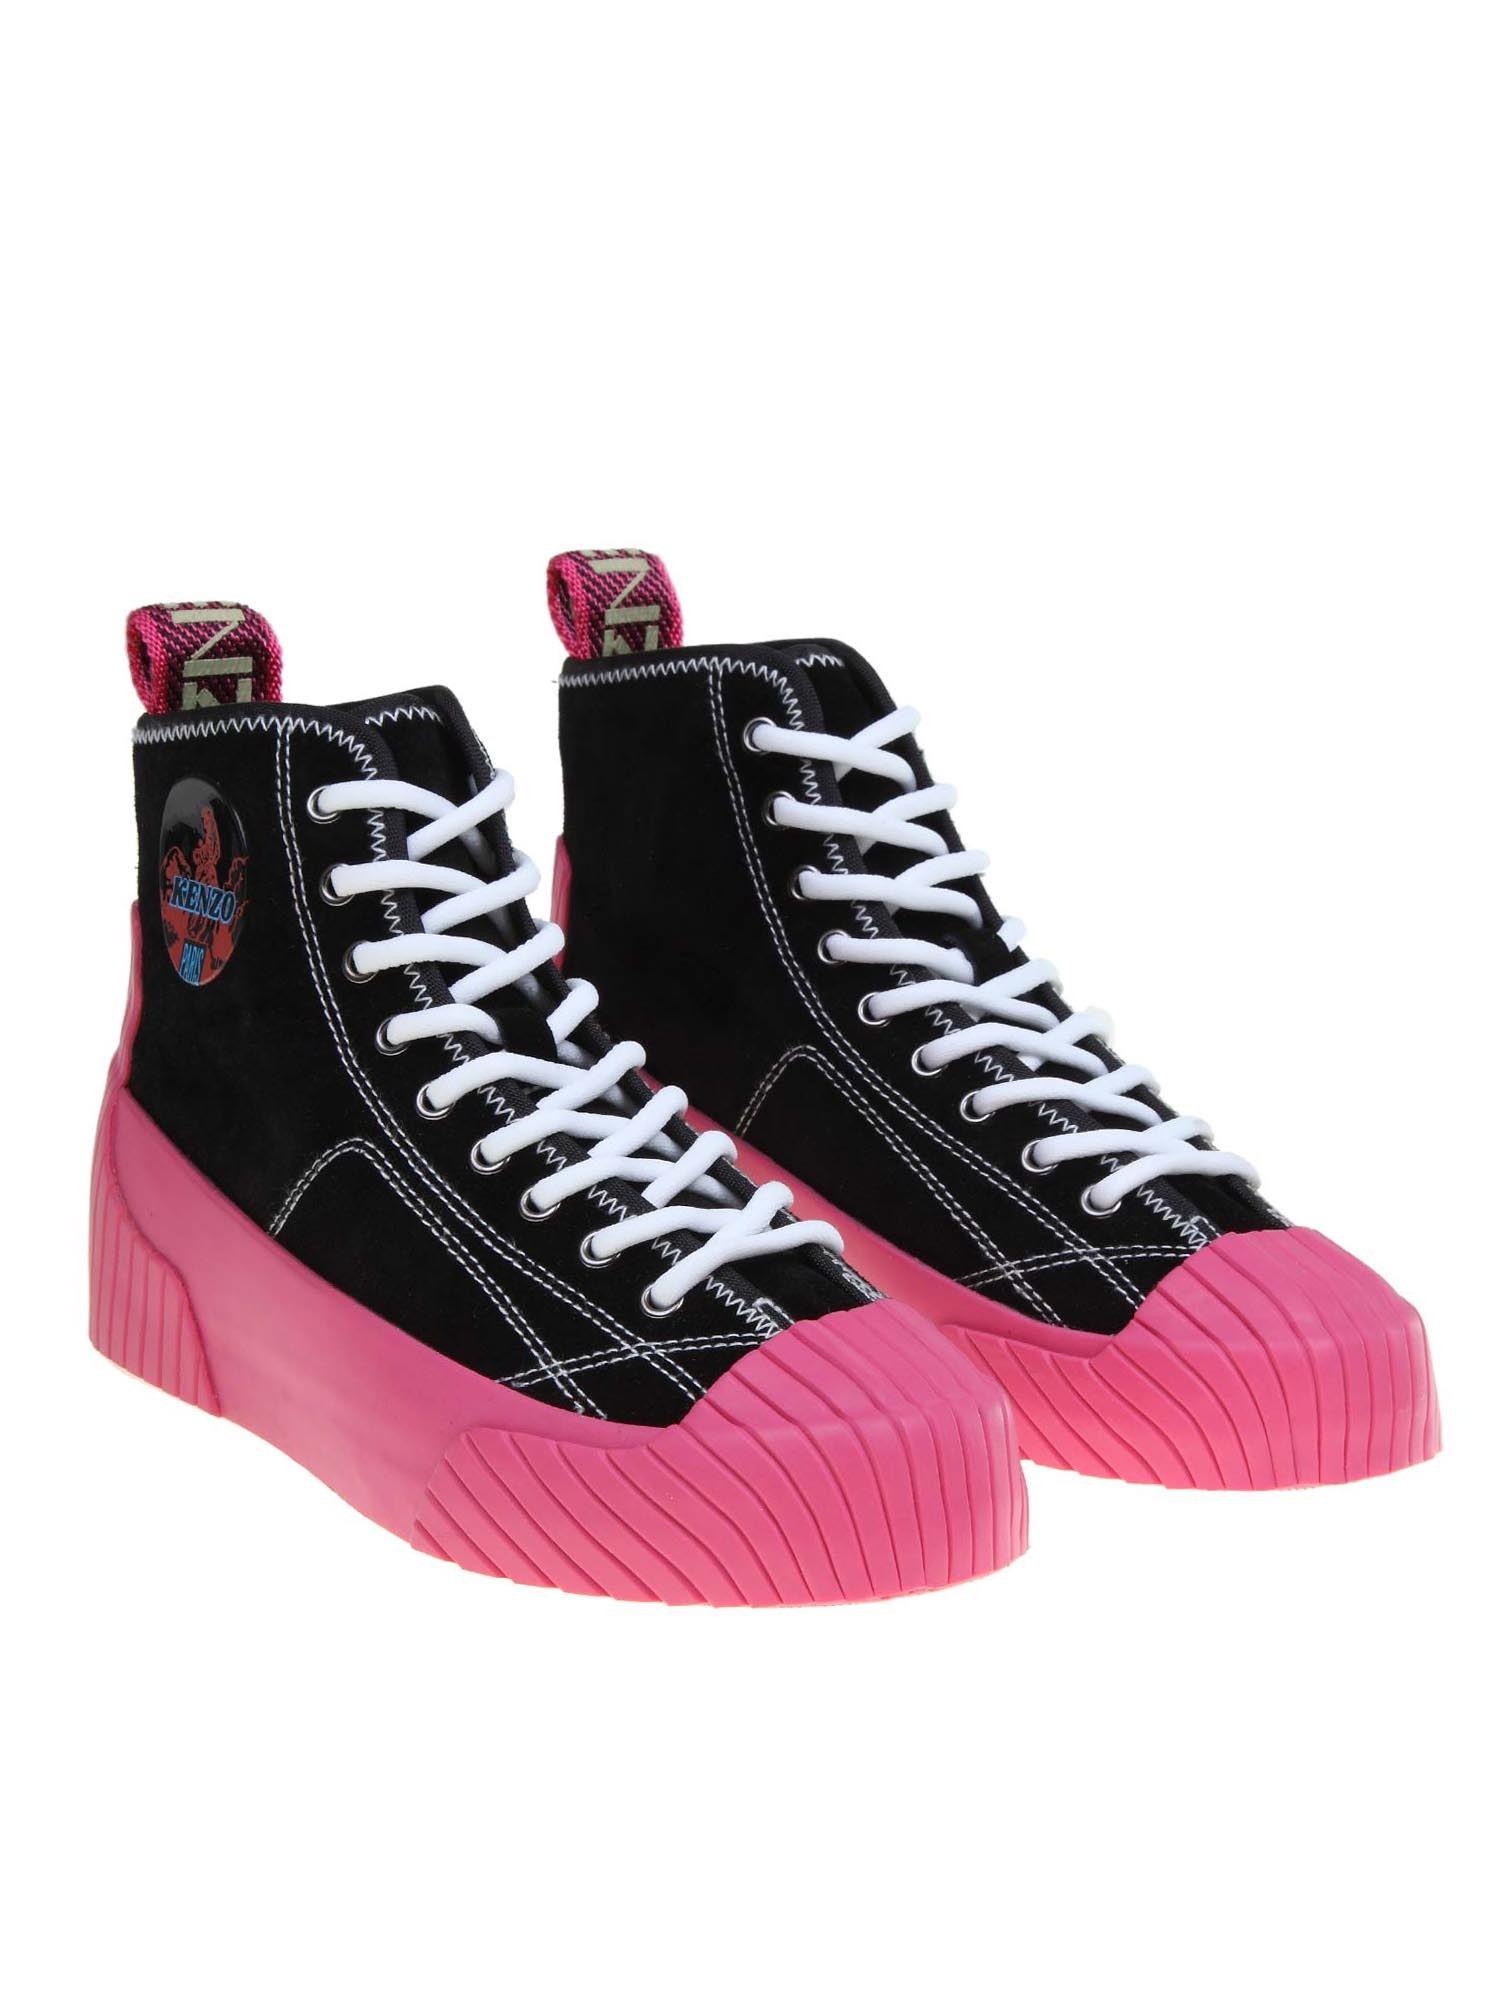 Banyan partiskhed Foto Kenzo Pink Shoes, Buy Now, Flash Sales, 56% OFF, ifoad-ugb.sn